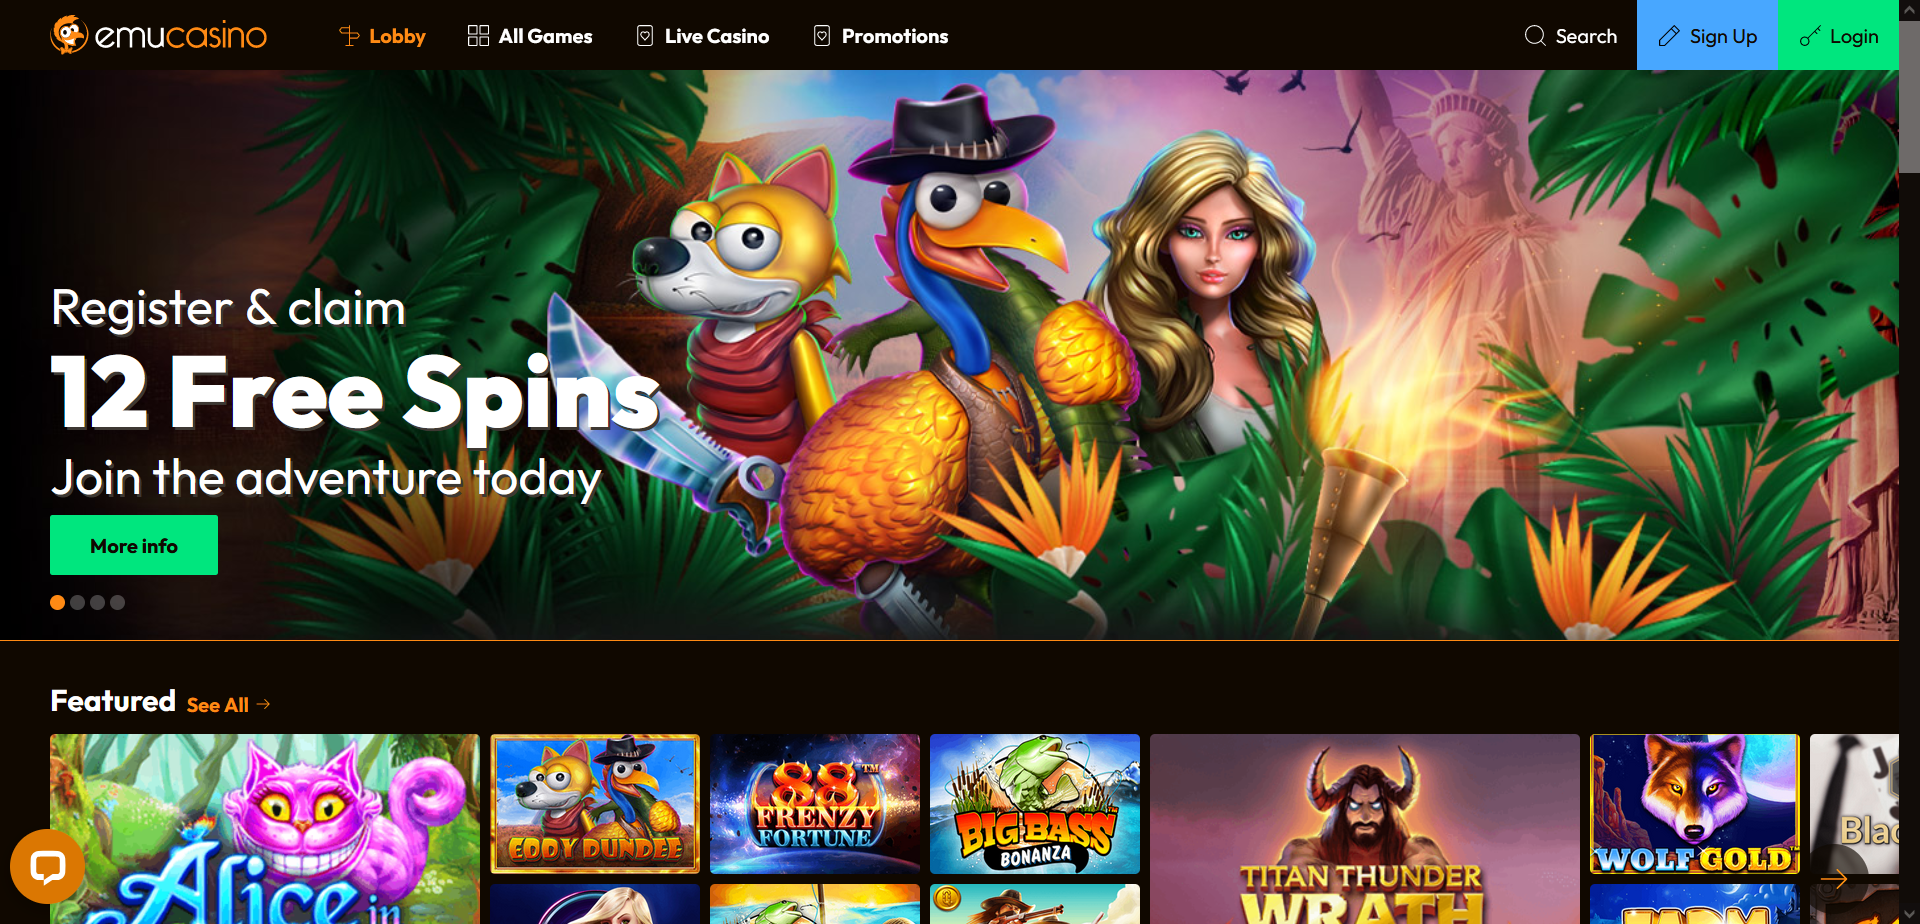 10 Reasons Why Emu Casino Online is the Best Place to Play Casino Games